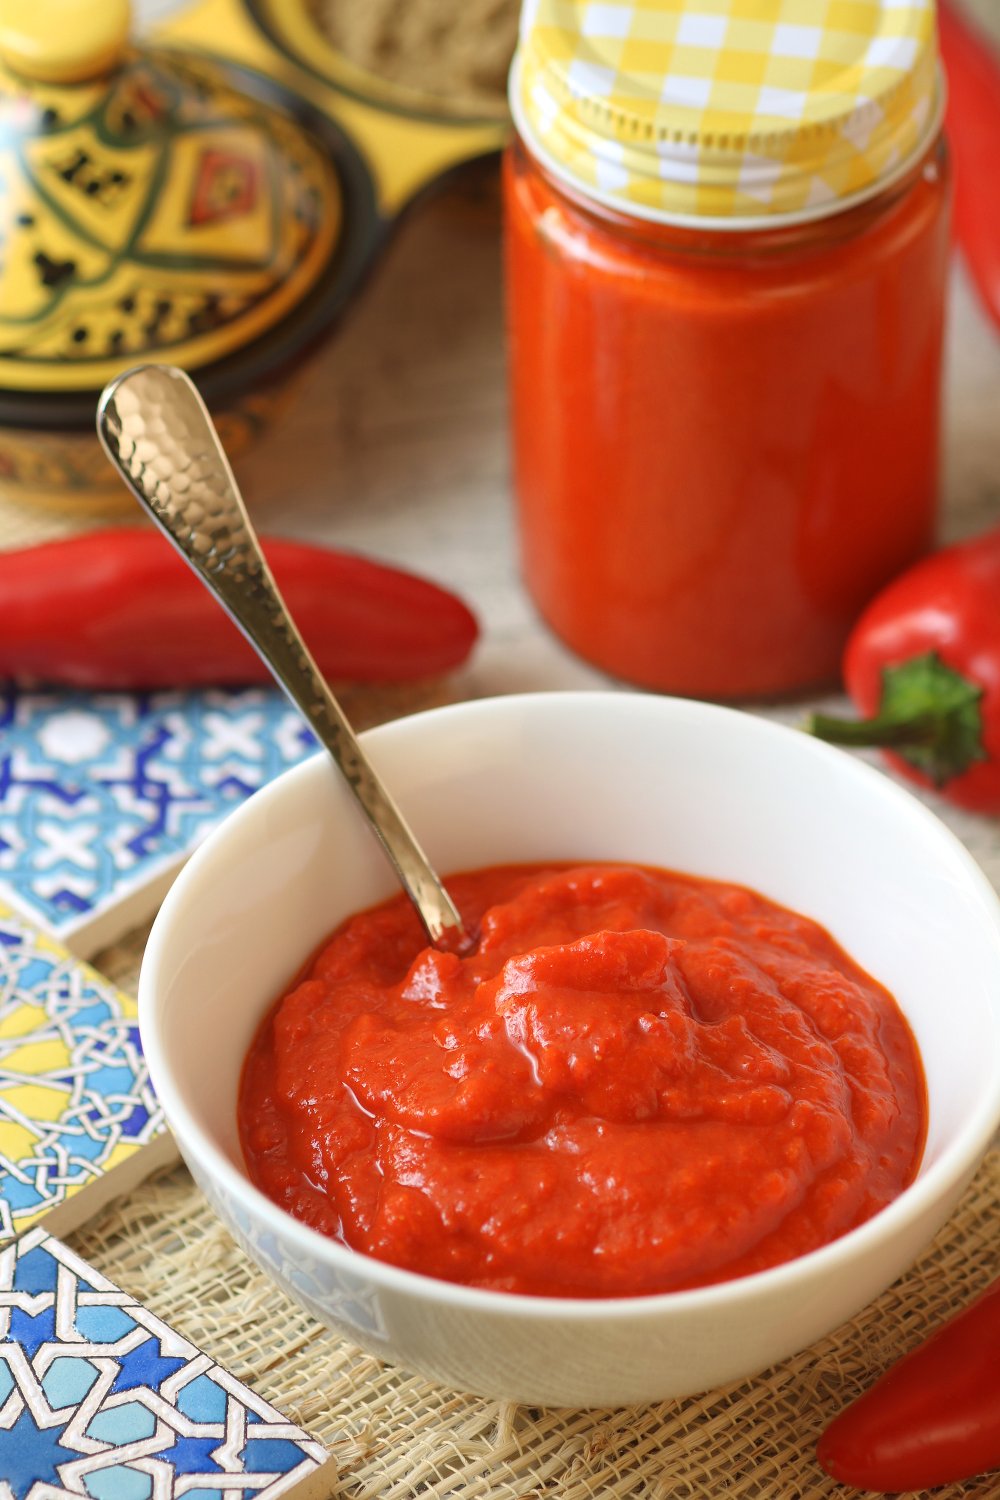 Harissa Recipe (North African peppers and spice paste)